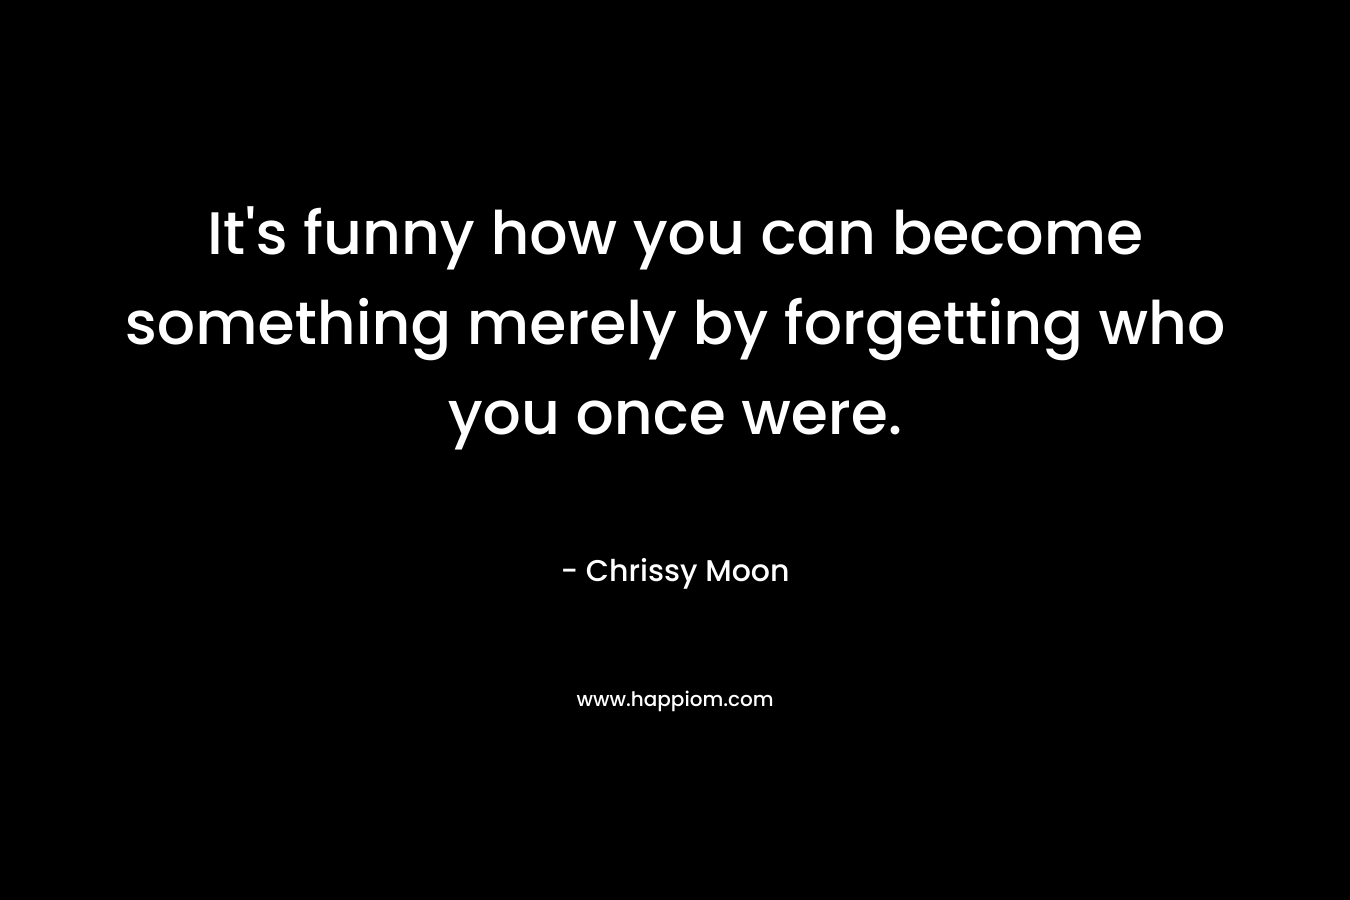 It's funny how you can become something merely by forgetting who you once were.